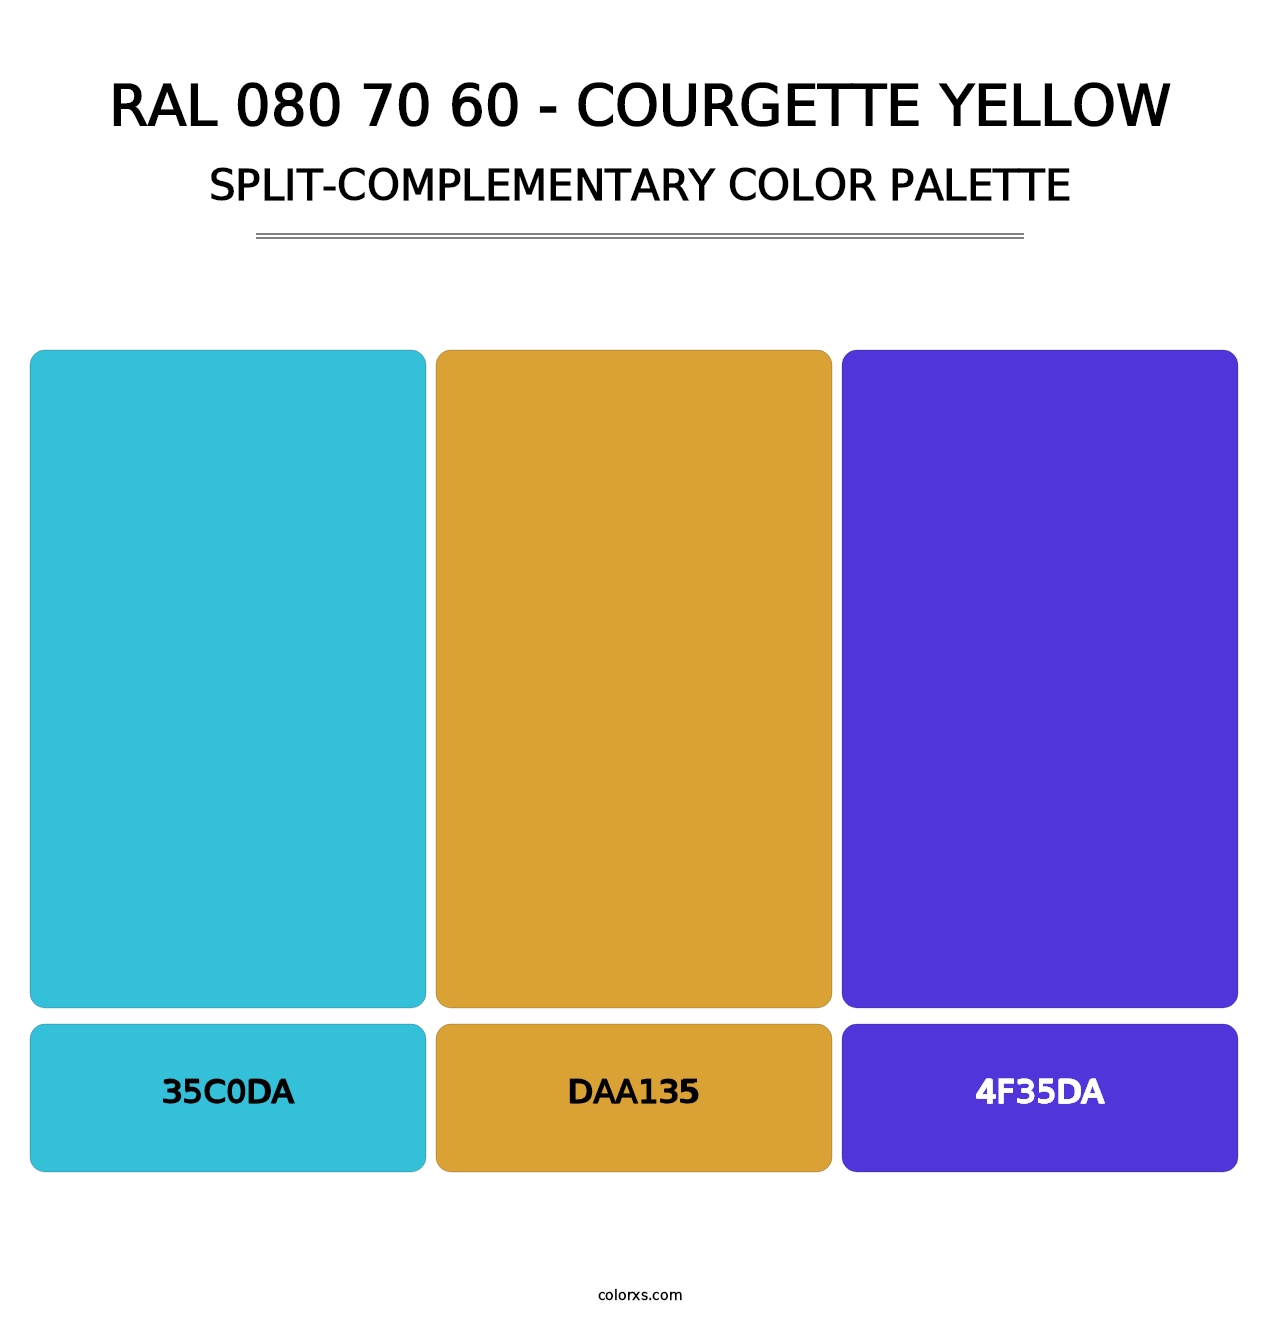 RAL 080 70 60 - Courgette Yellow - Split-Complementary Color Palette